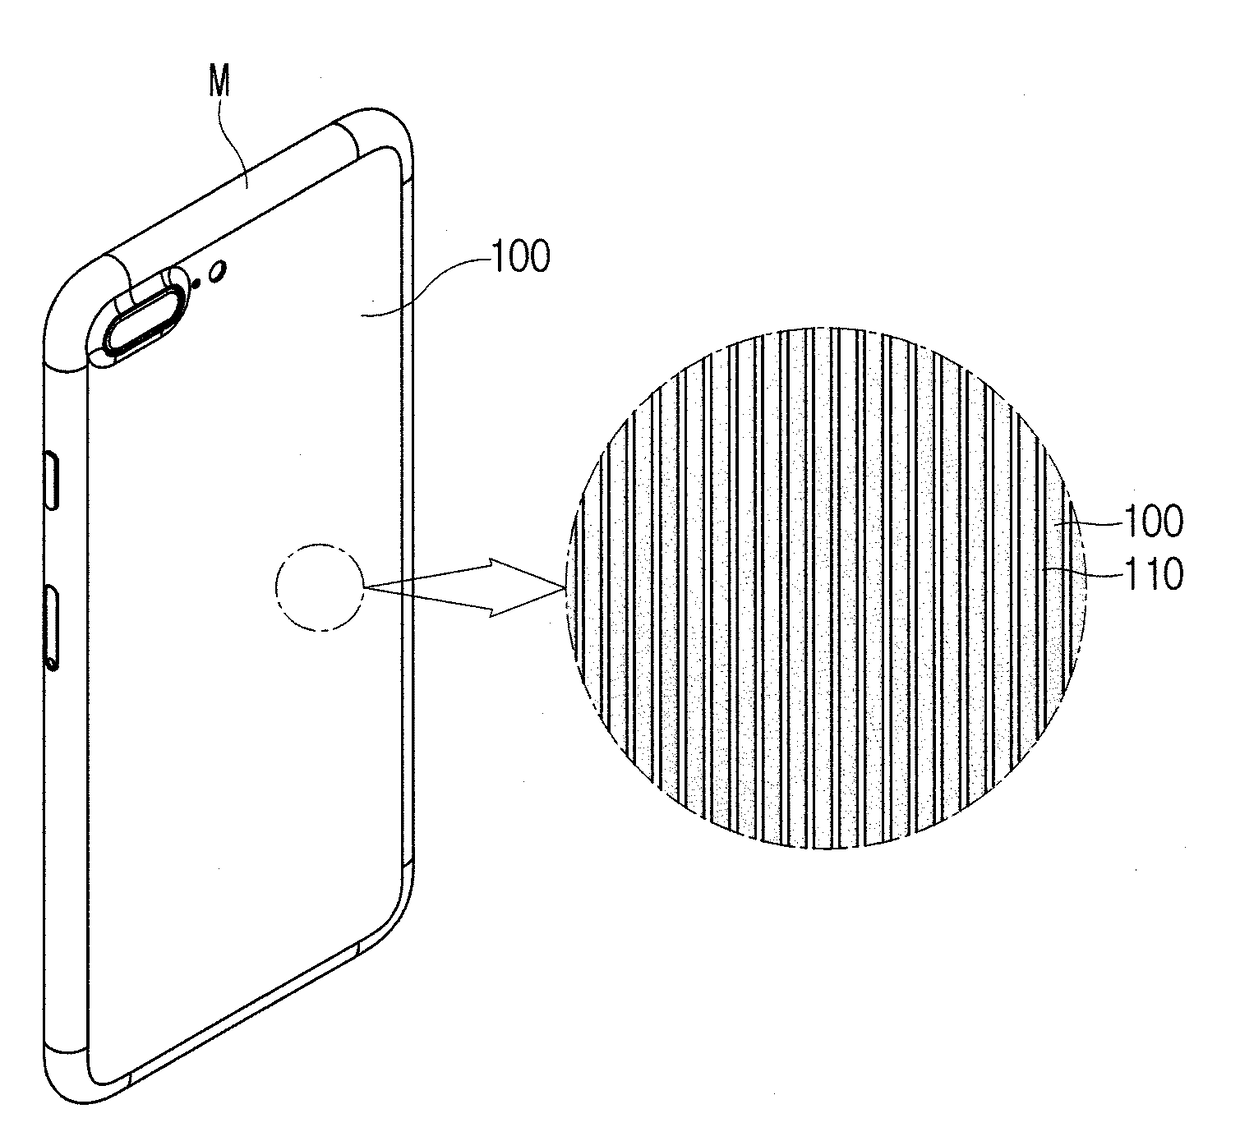 Metal frame transmitting the electromagnetic wave or having the function of heat radiation